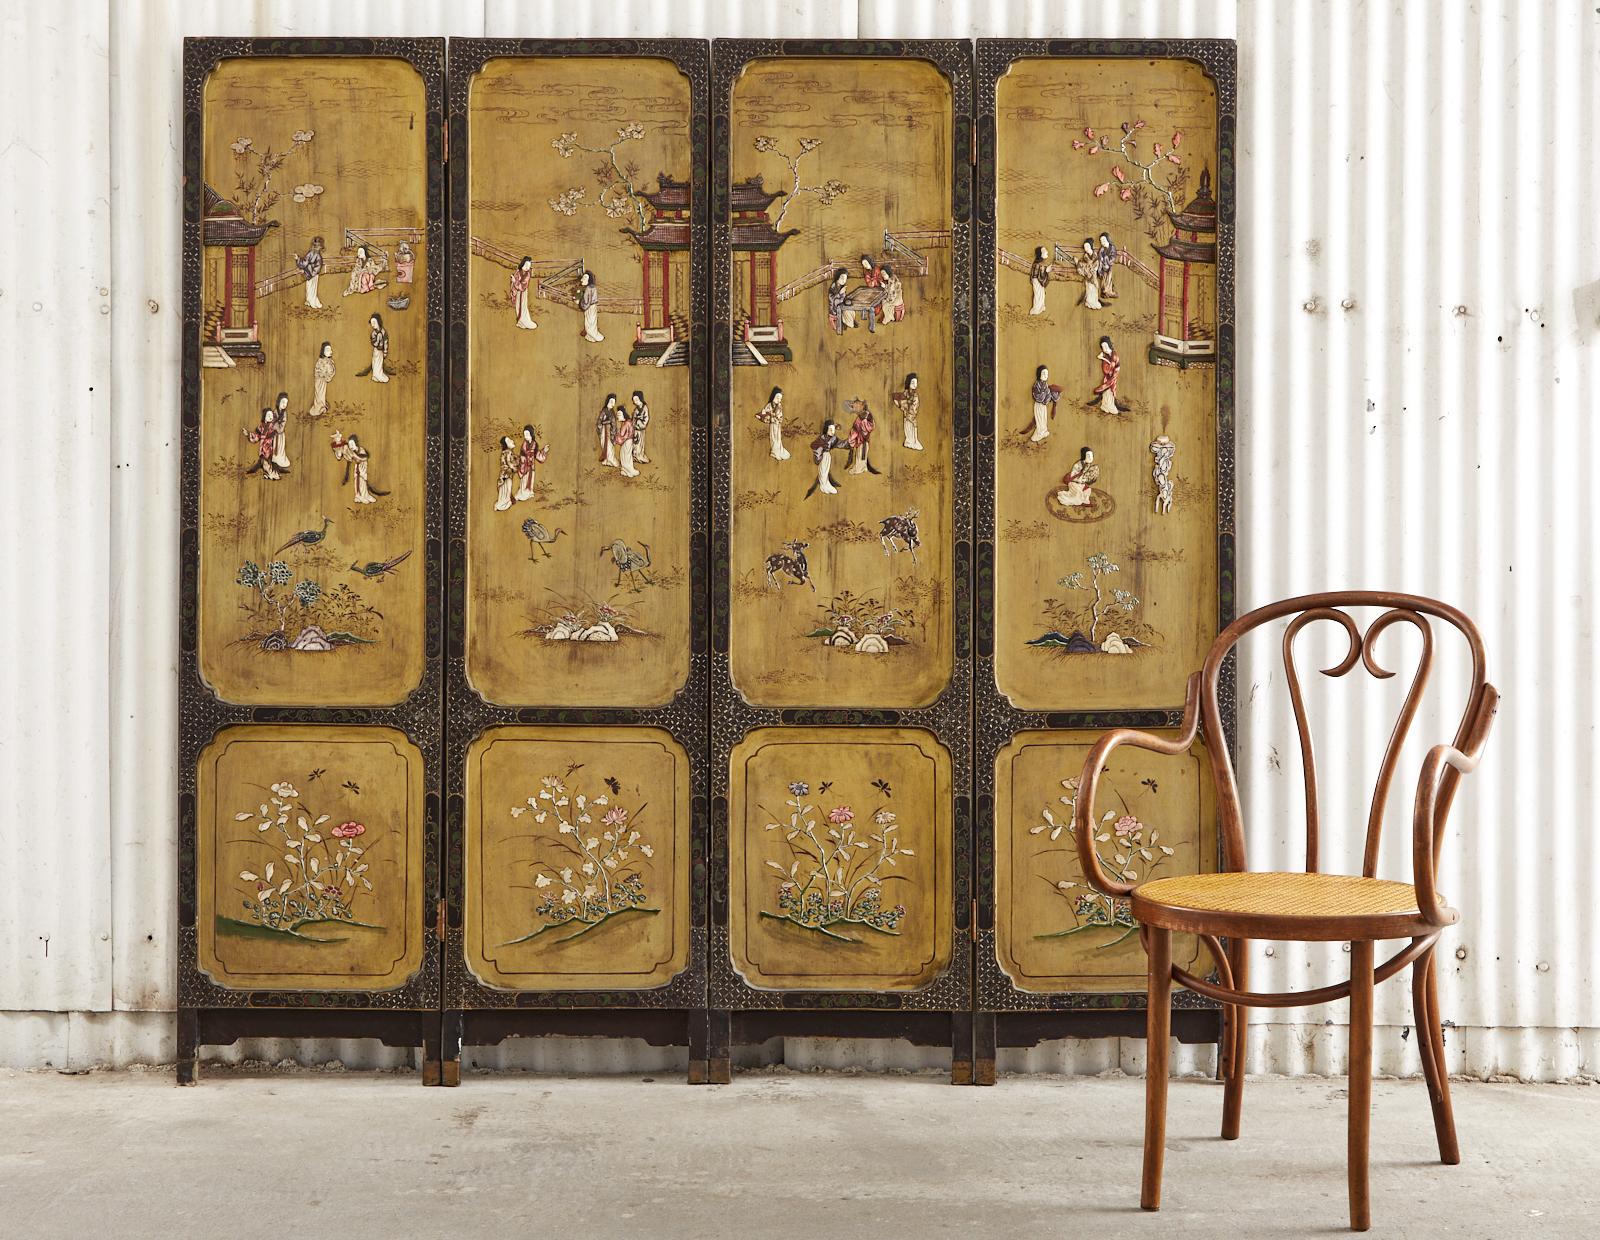 Extraordinary Chinese export four-panel coromandel screen from late Qing dynasty featuring a carved soapstone and wood pagoda landscape. The lacquered panels are decorated with carved beauties among flora and fauna over a gilt background. The screen